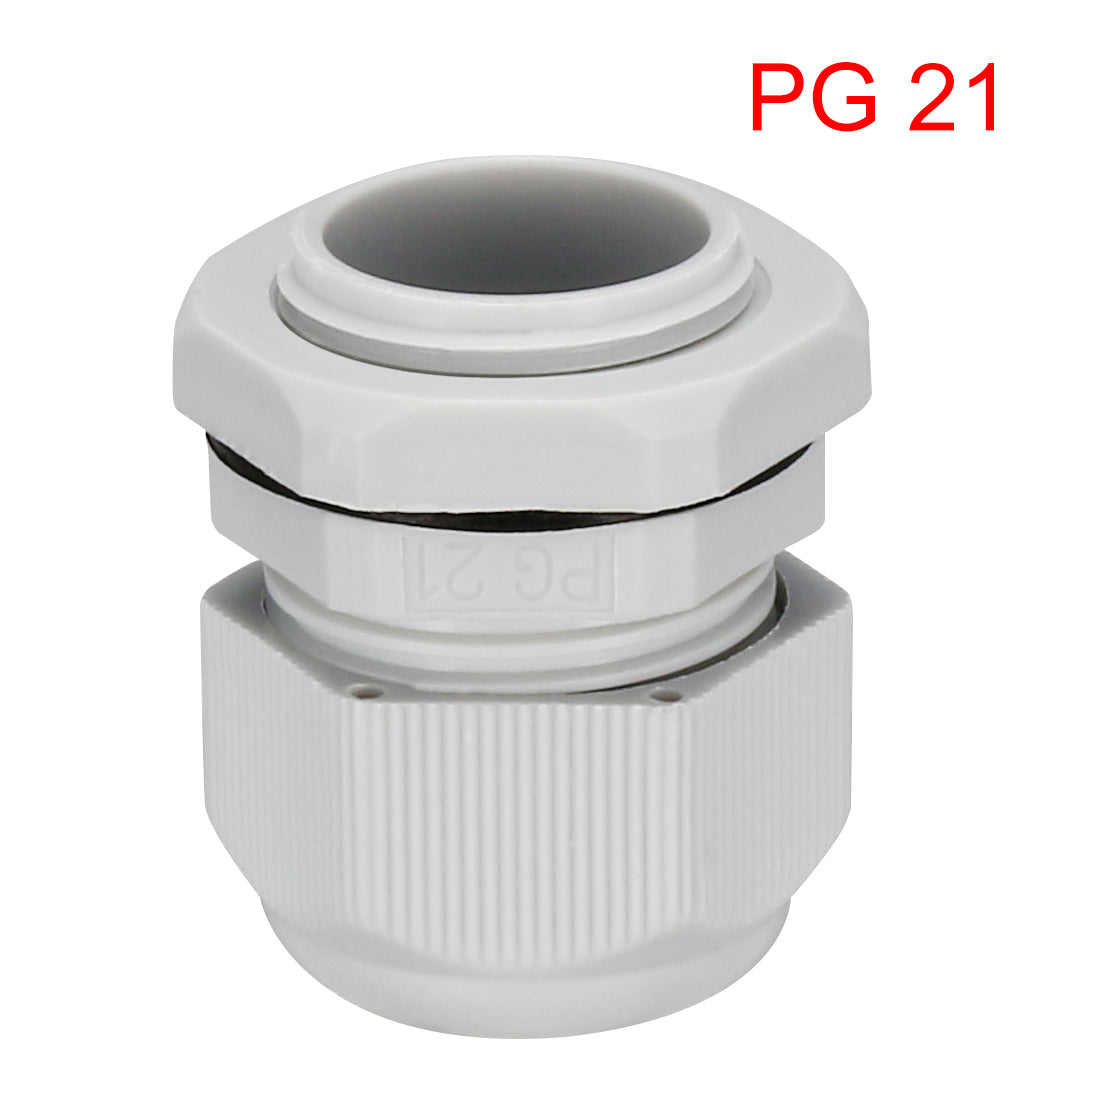 uxcell Uxcell 5Pcs PG21 Cable Gland Waterproof Plastic Joint Adjustable Locknut White for 13mm-16mm Dia Cable Wire